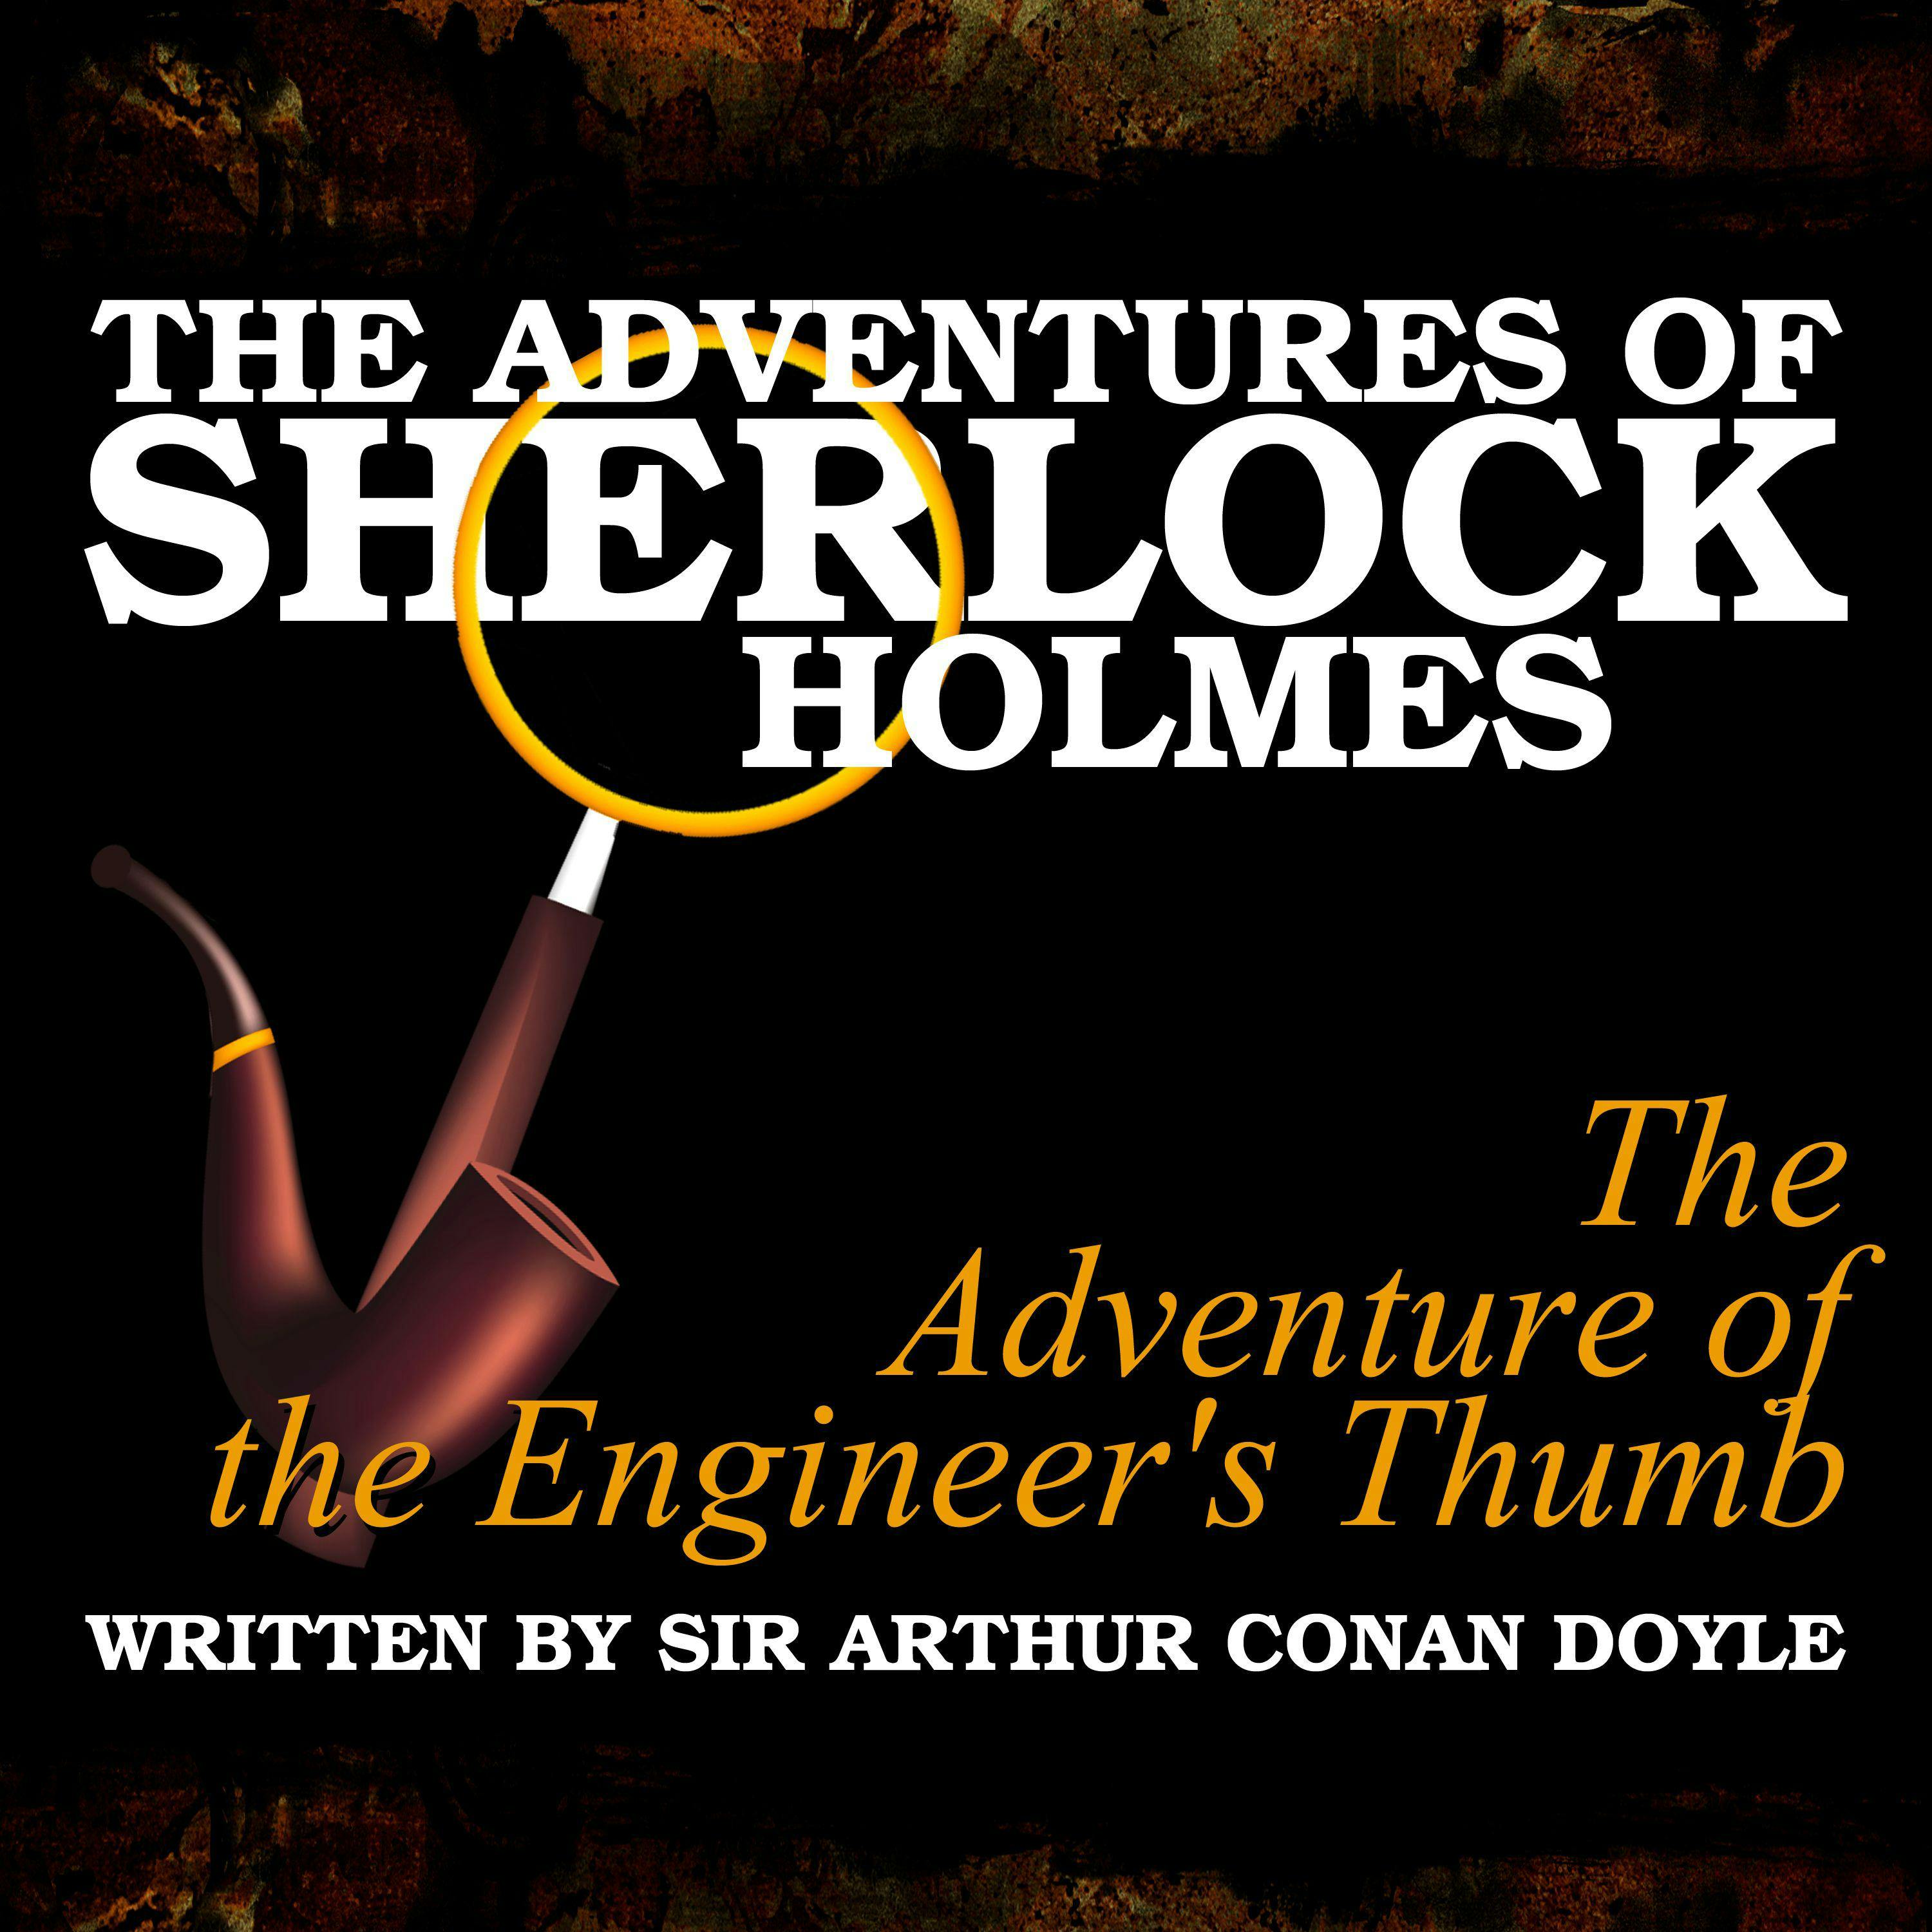 The Adventures of Sherlock Holmes: The Adventure of the Engineer's Thumb - undefined